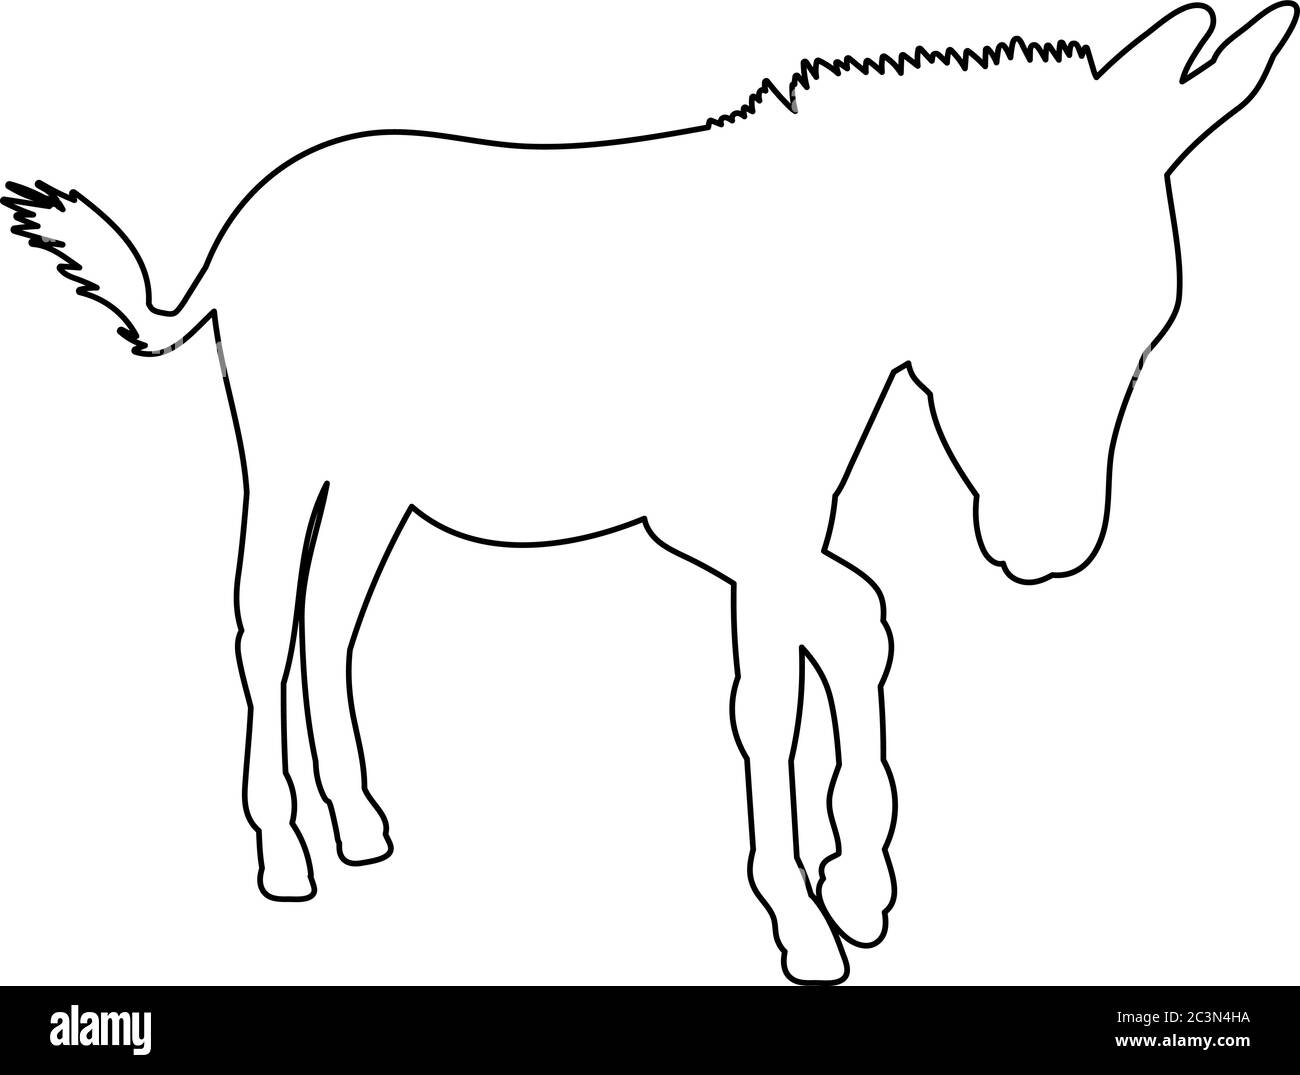 contour of donkeys, sketch Stock Vector